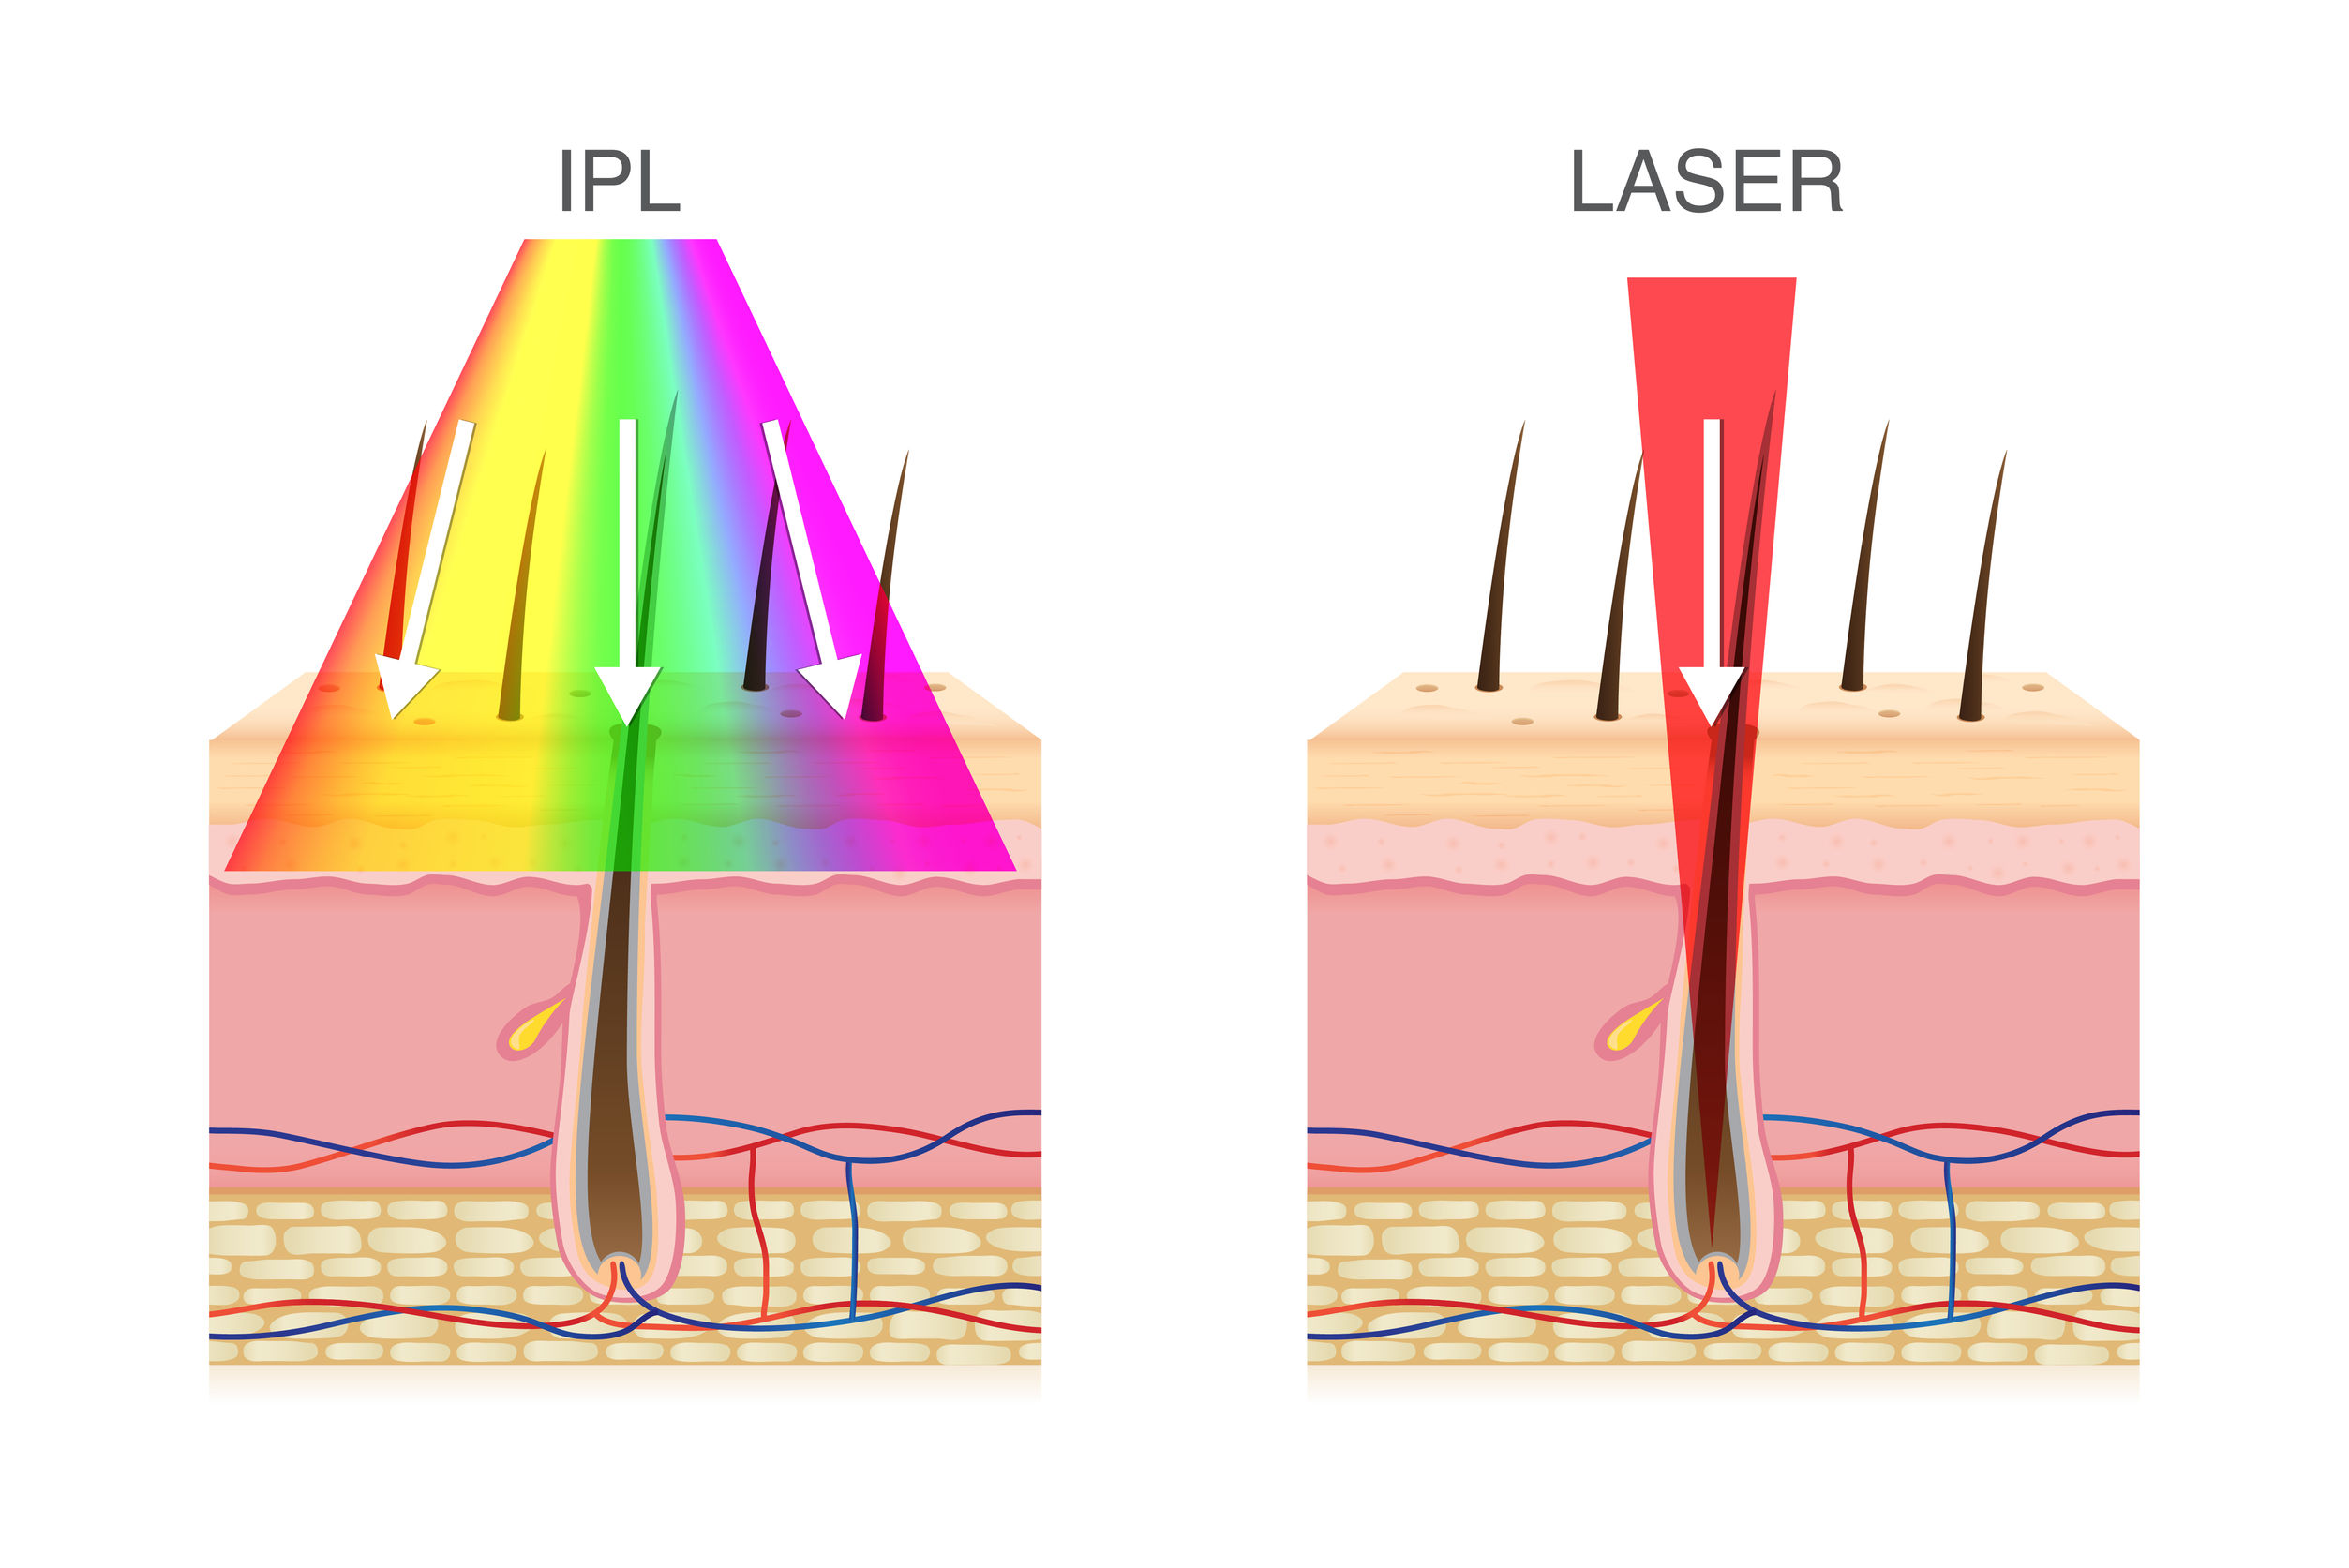 Is Laser Or IPL Better For Hair Removal?